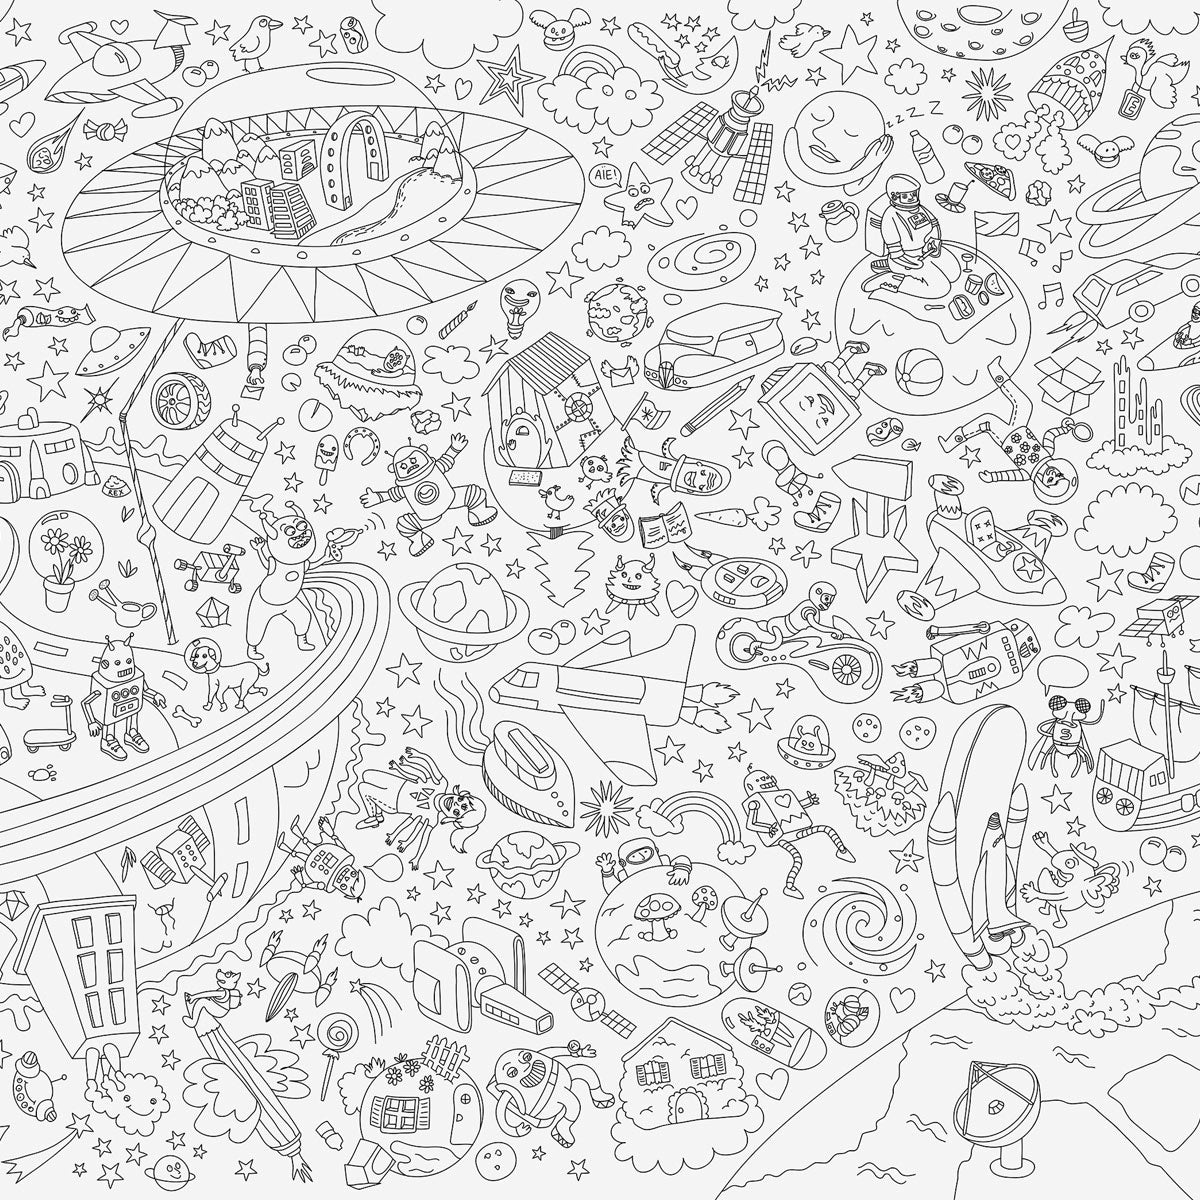 Omy | Giant Coloring Poster - Cosmos